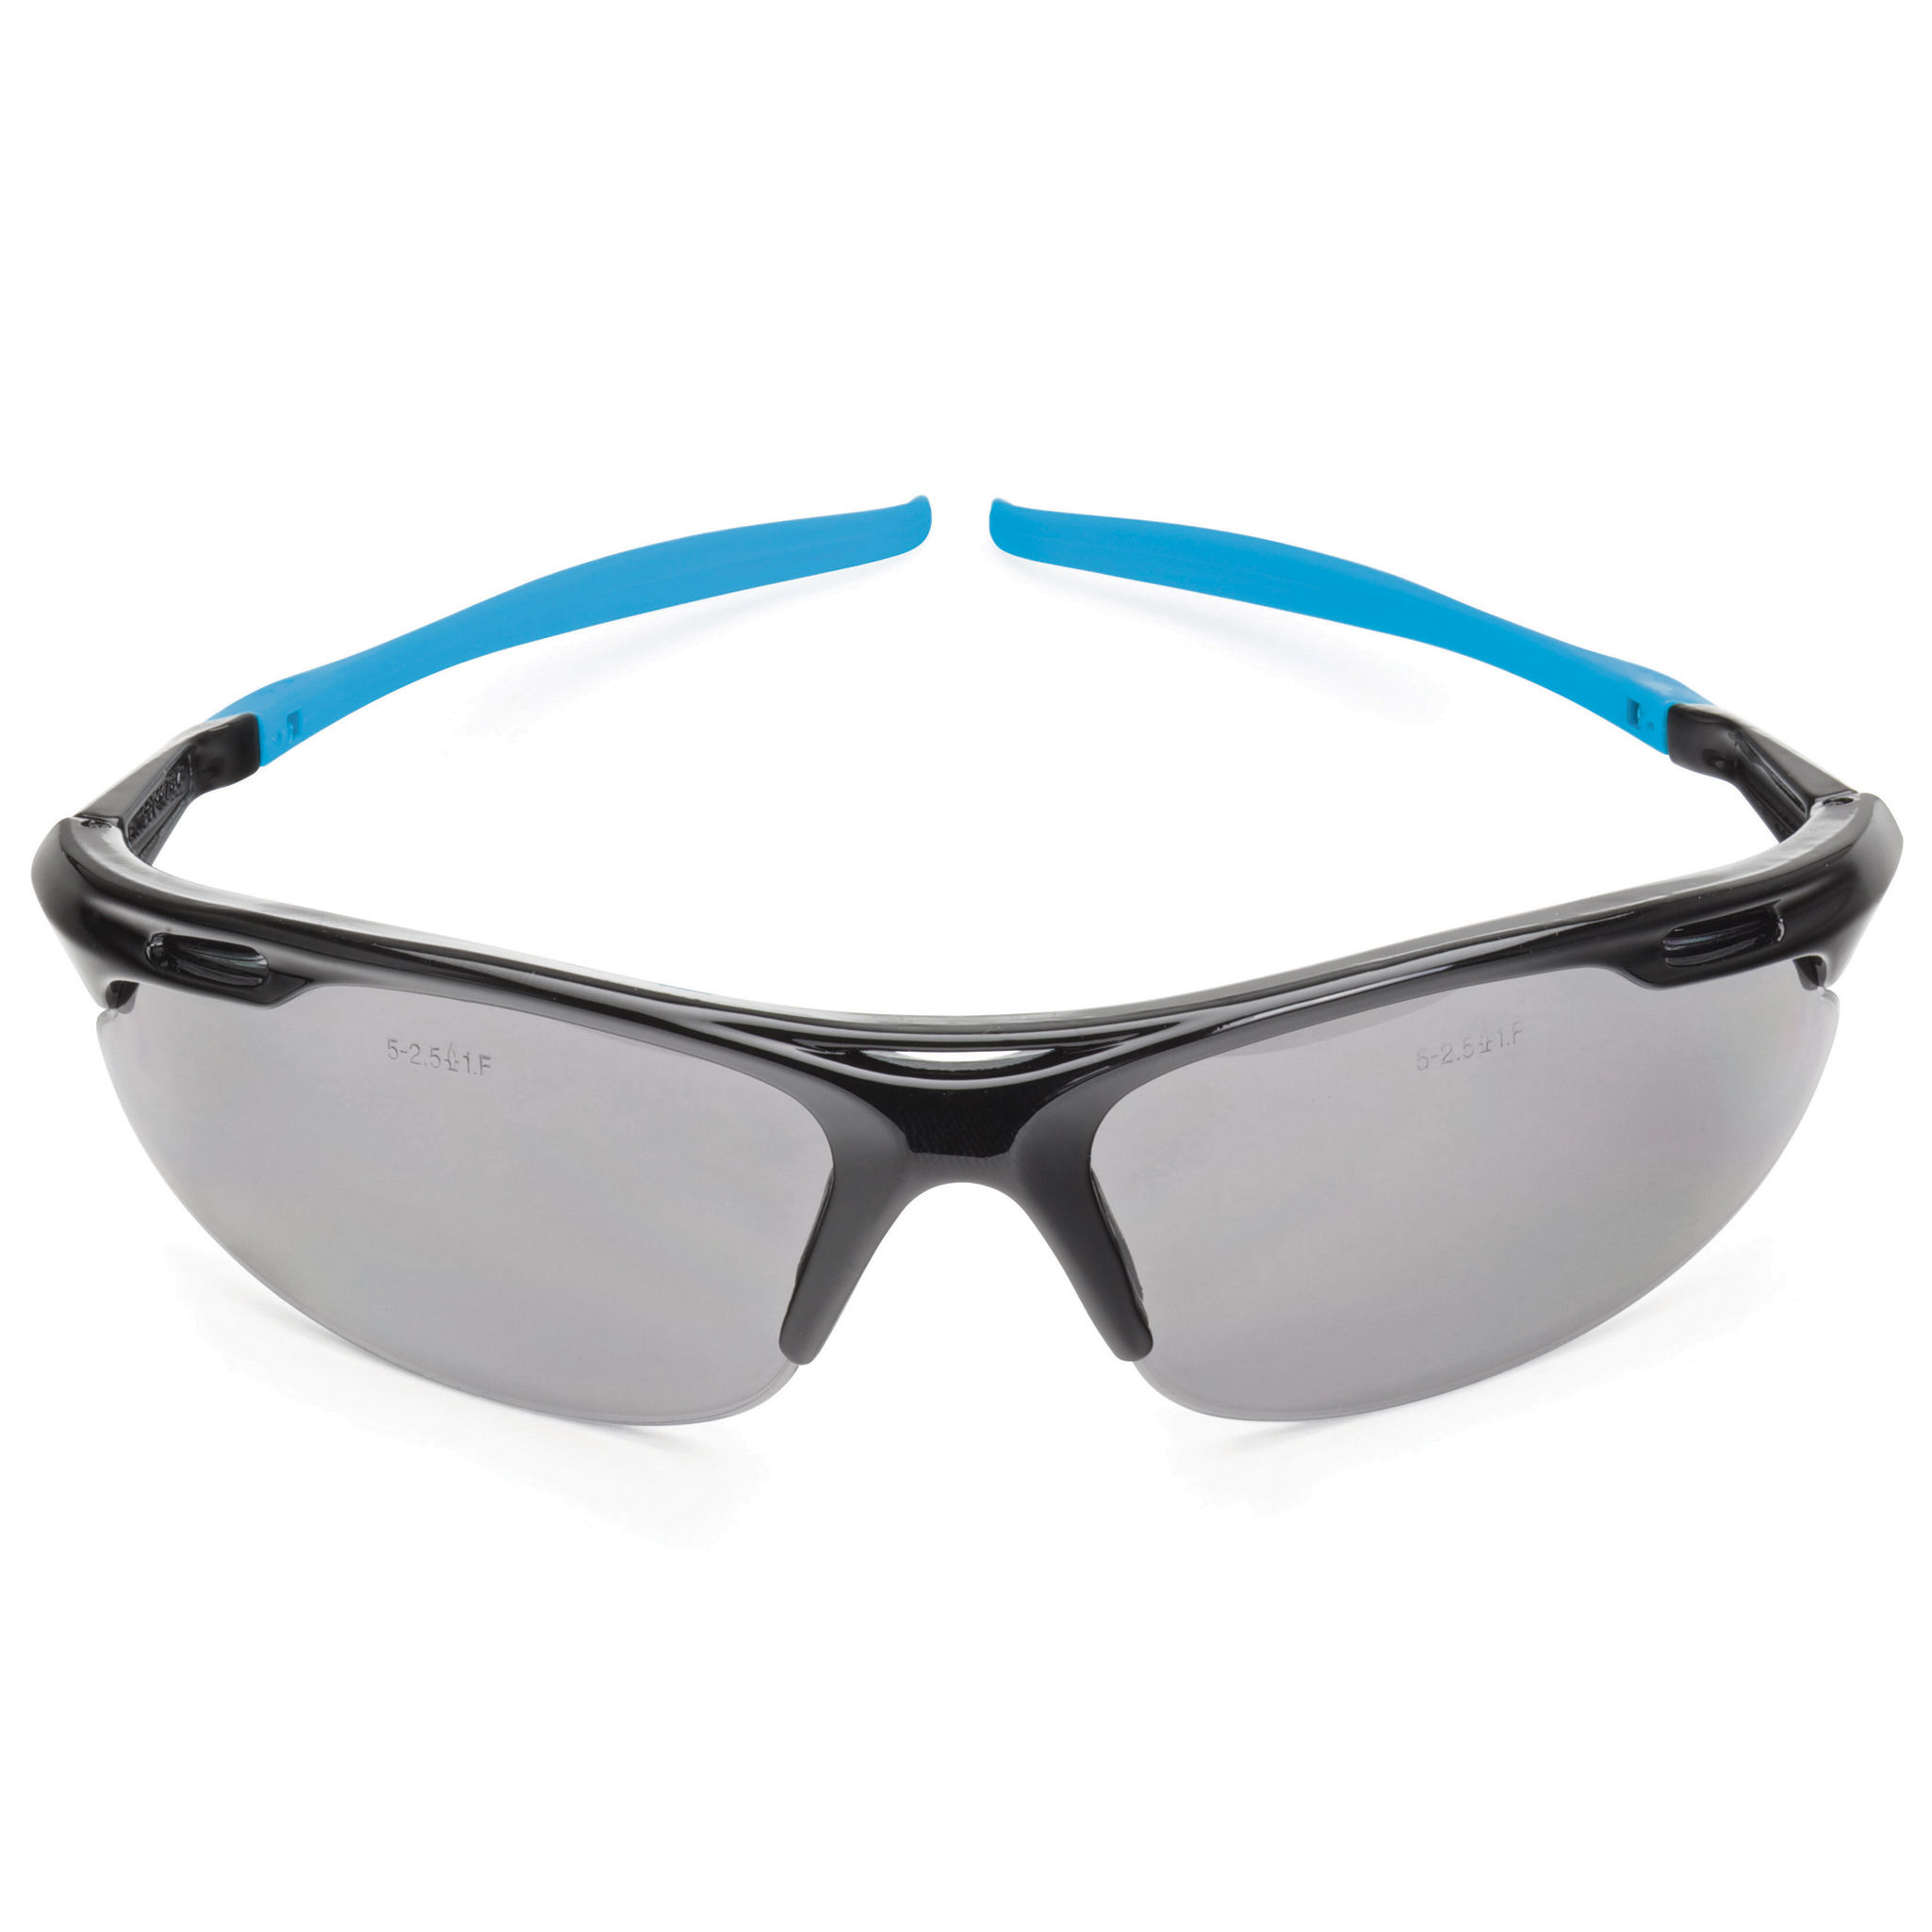 OX Professional Wrap Around Safety Glasses Smoked - OX-S248102